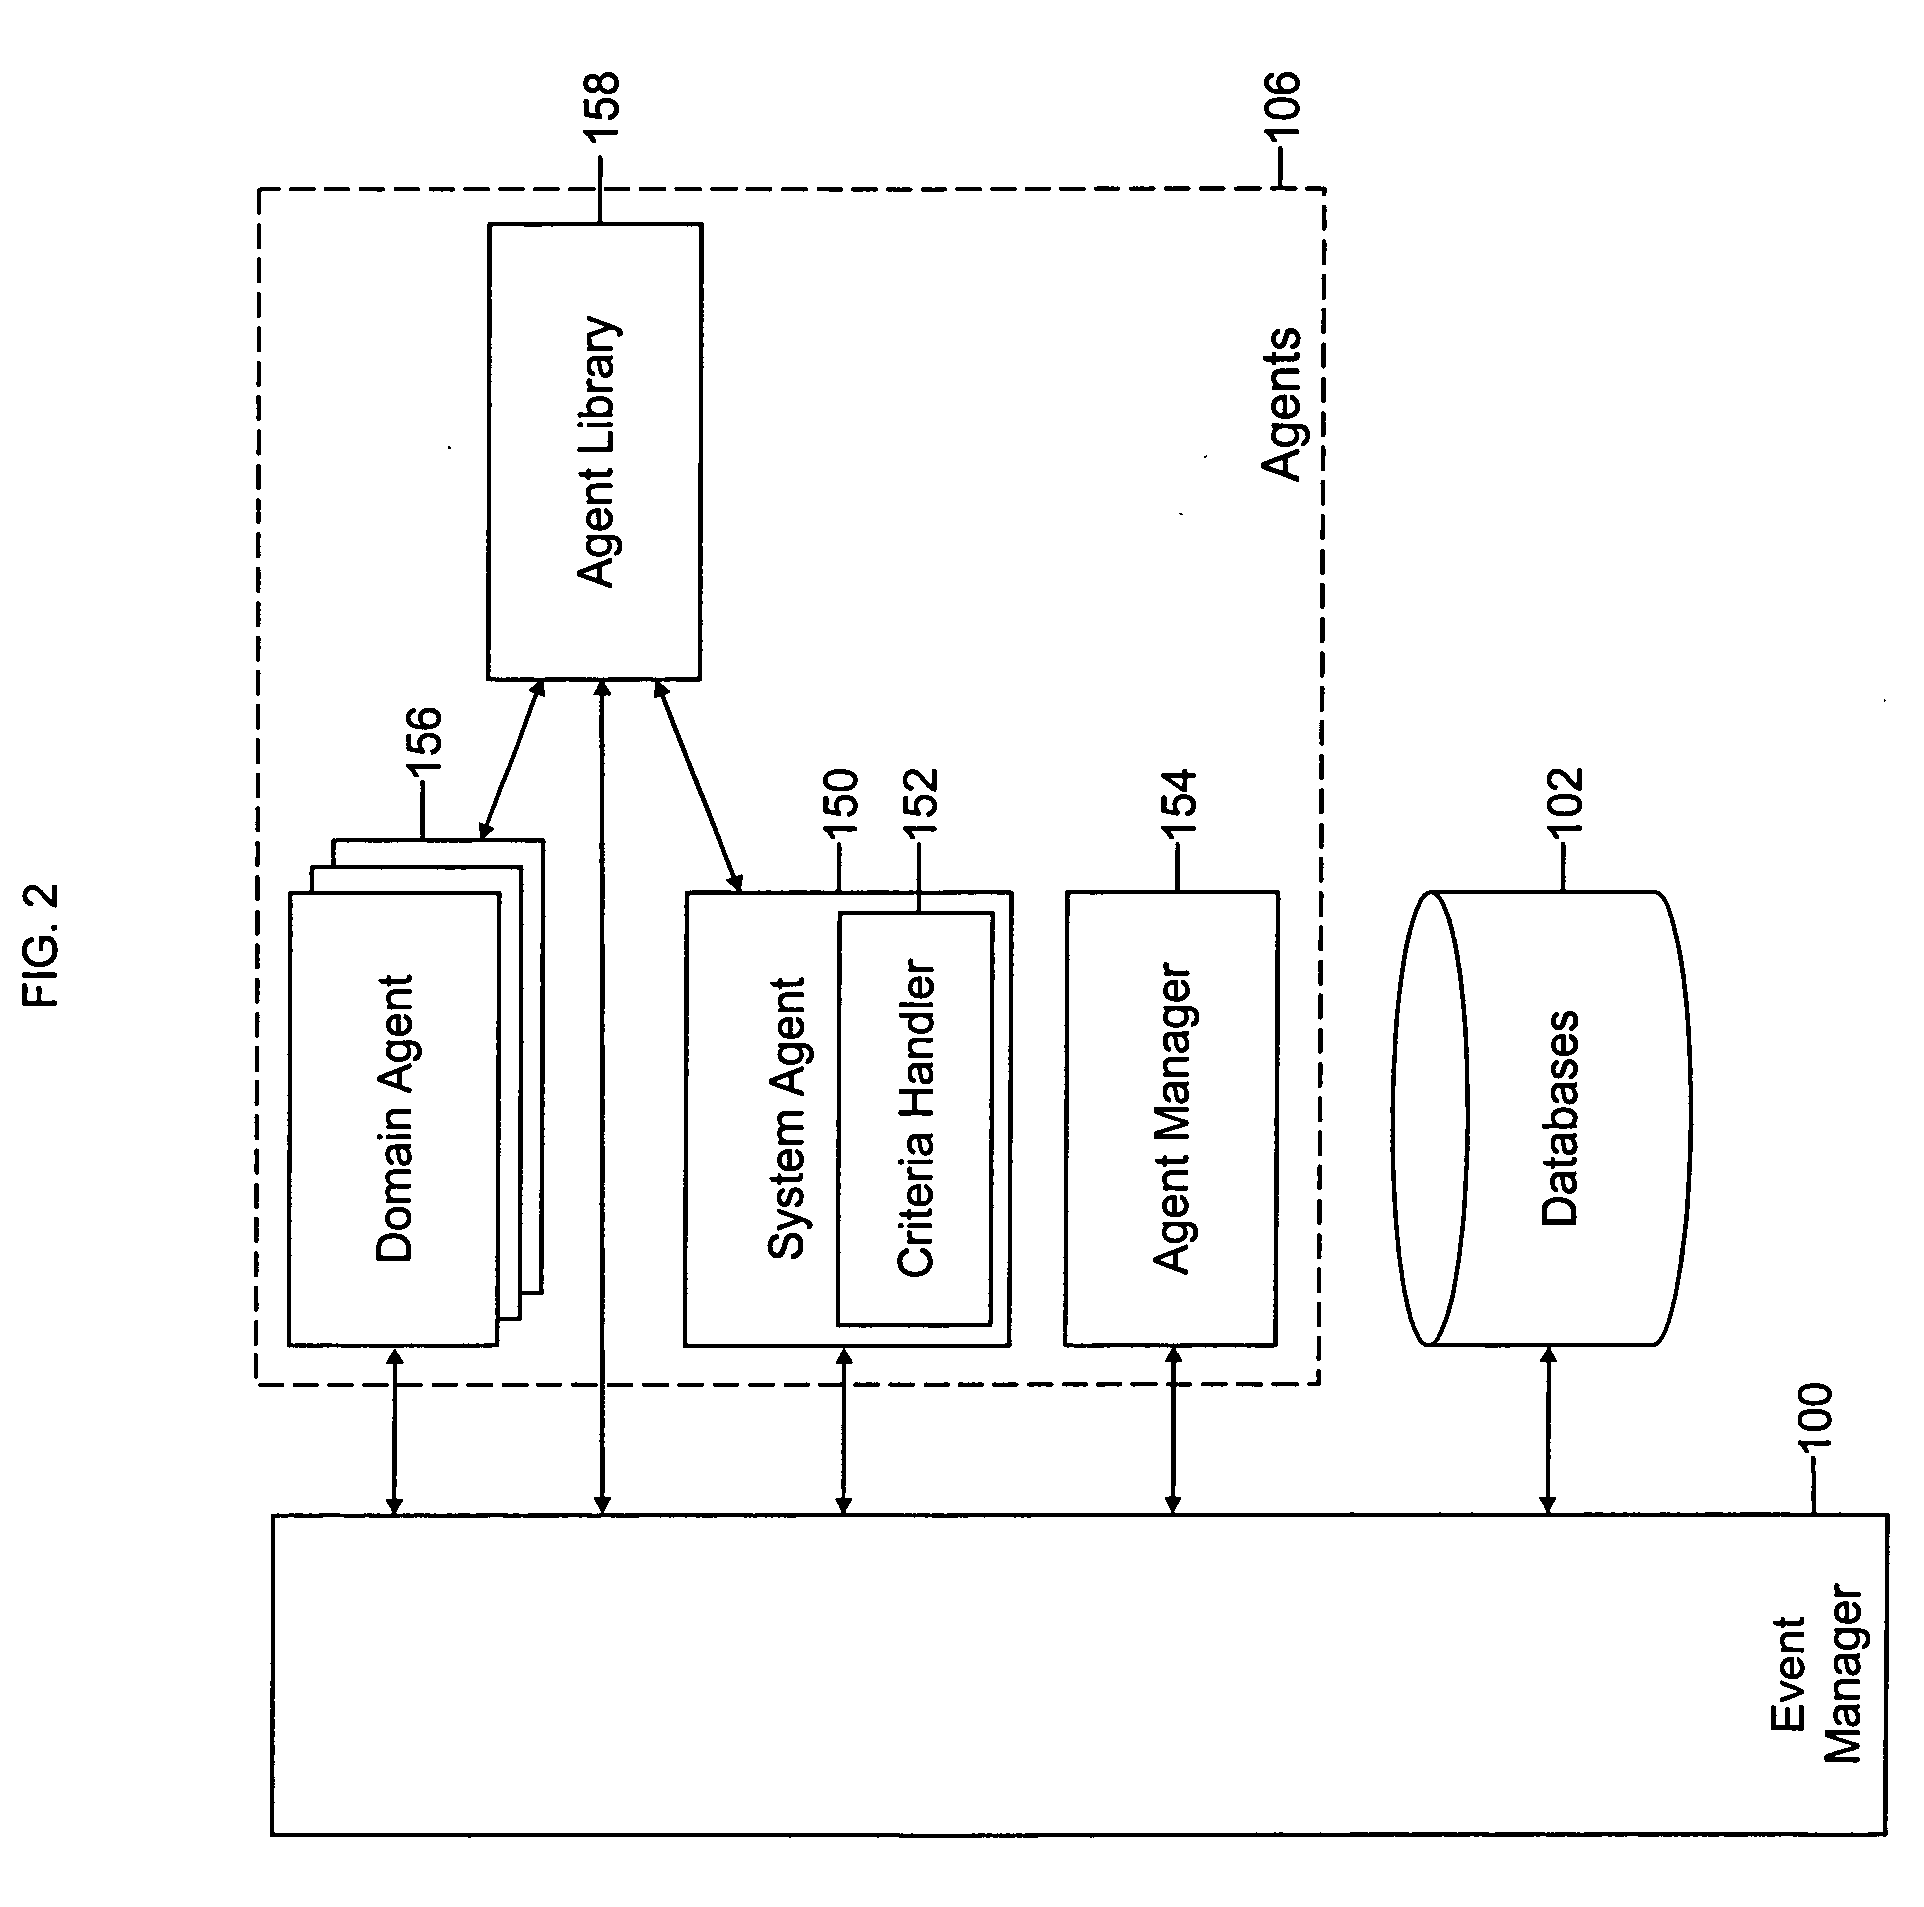 System and method of supporting adaptive misrecognition in conversational speech